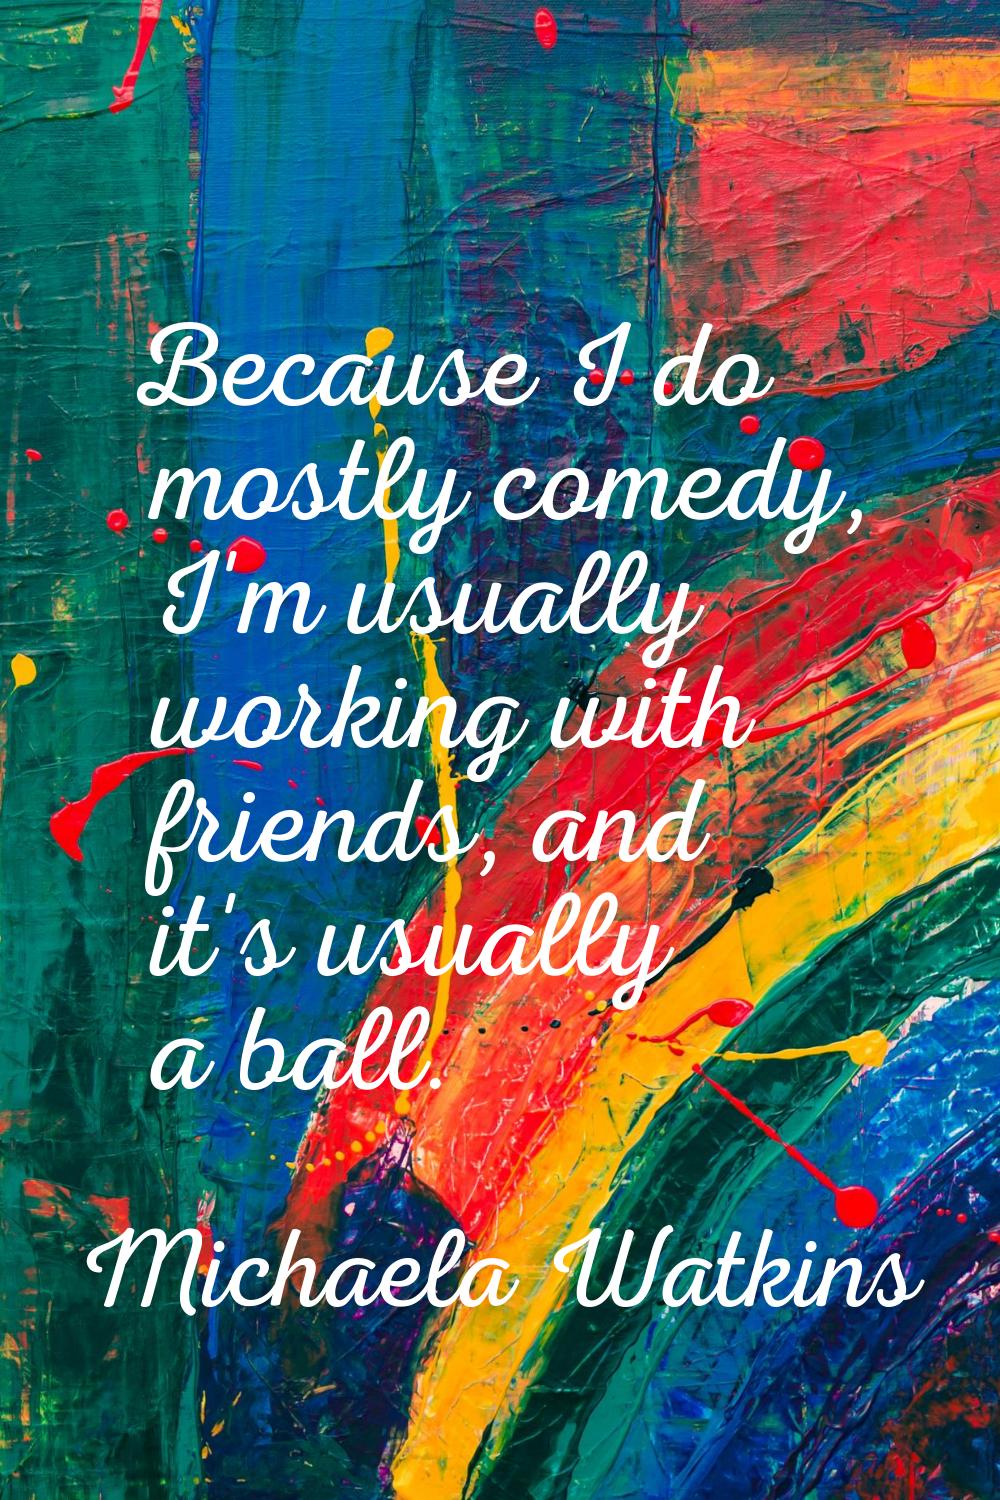 Because I do mostly comedy, I'm usually working with friends, and it's usually a ball.